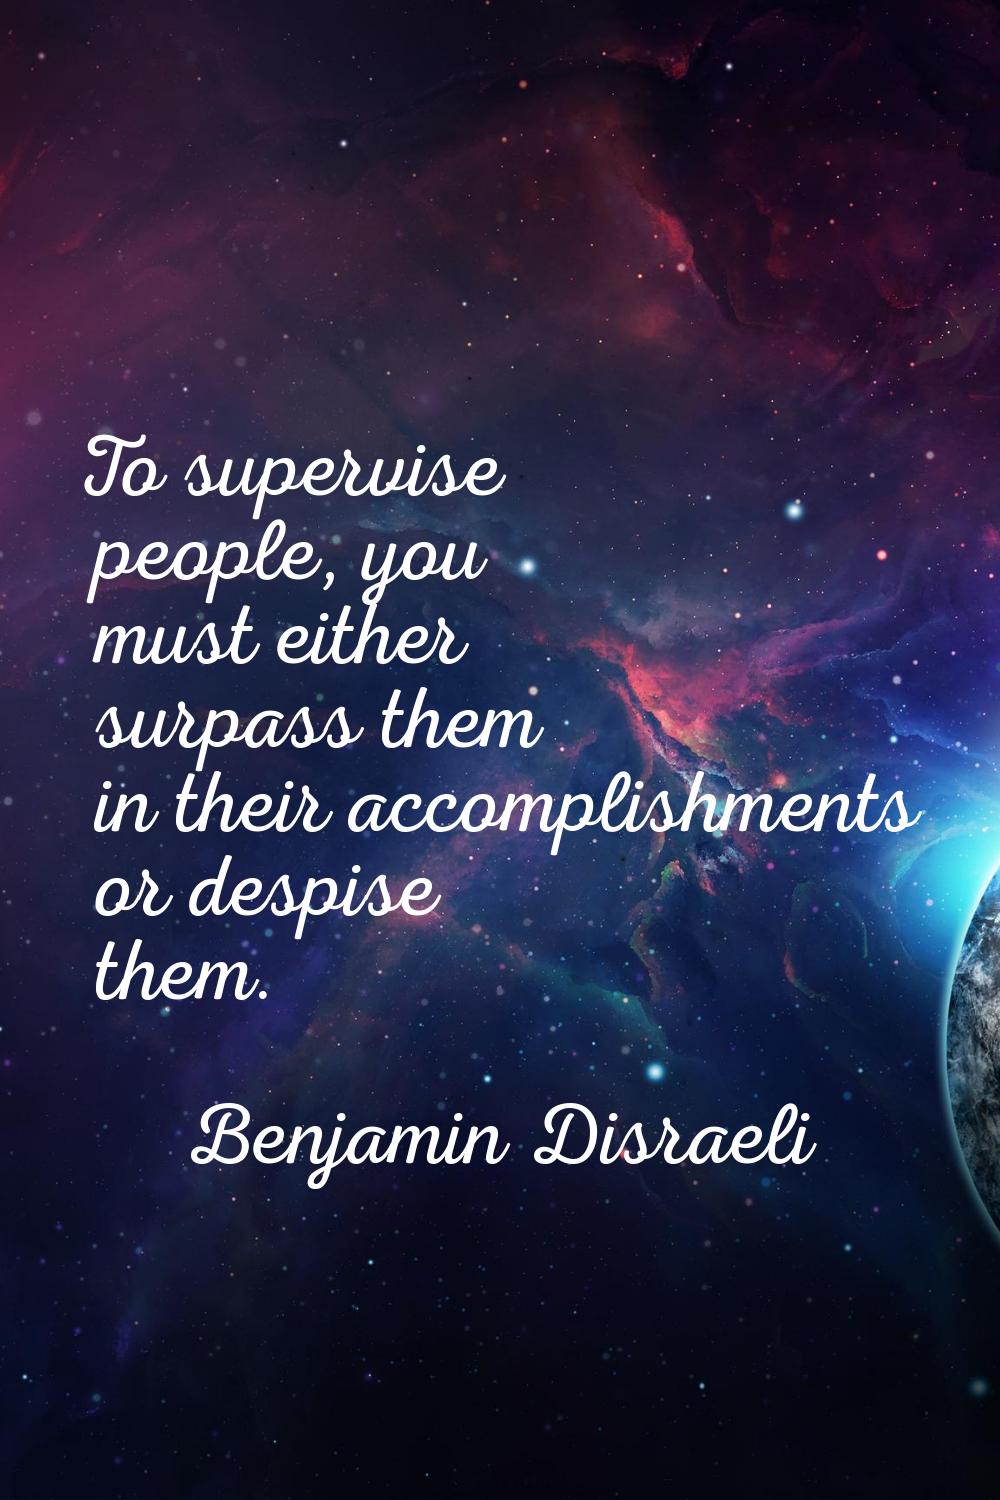 To supervise people, you must either surpass them in their accomplishments or despise them.